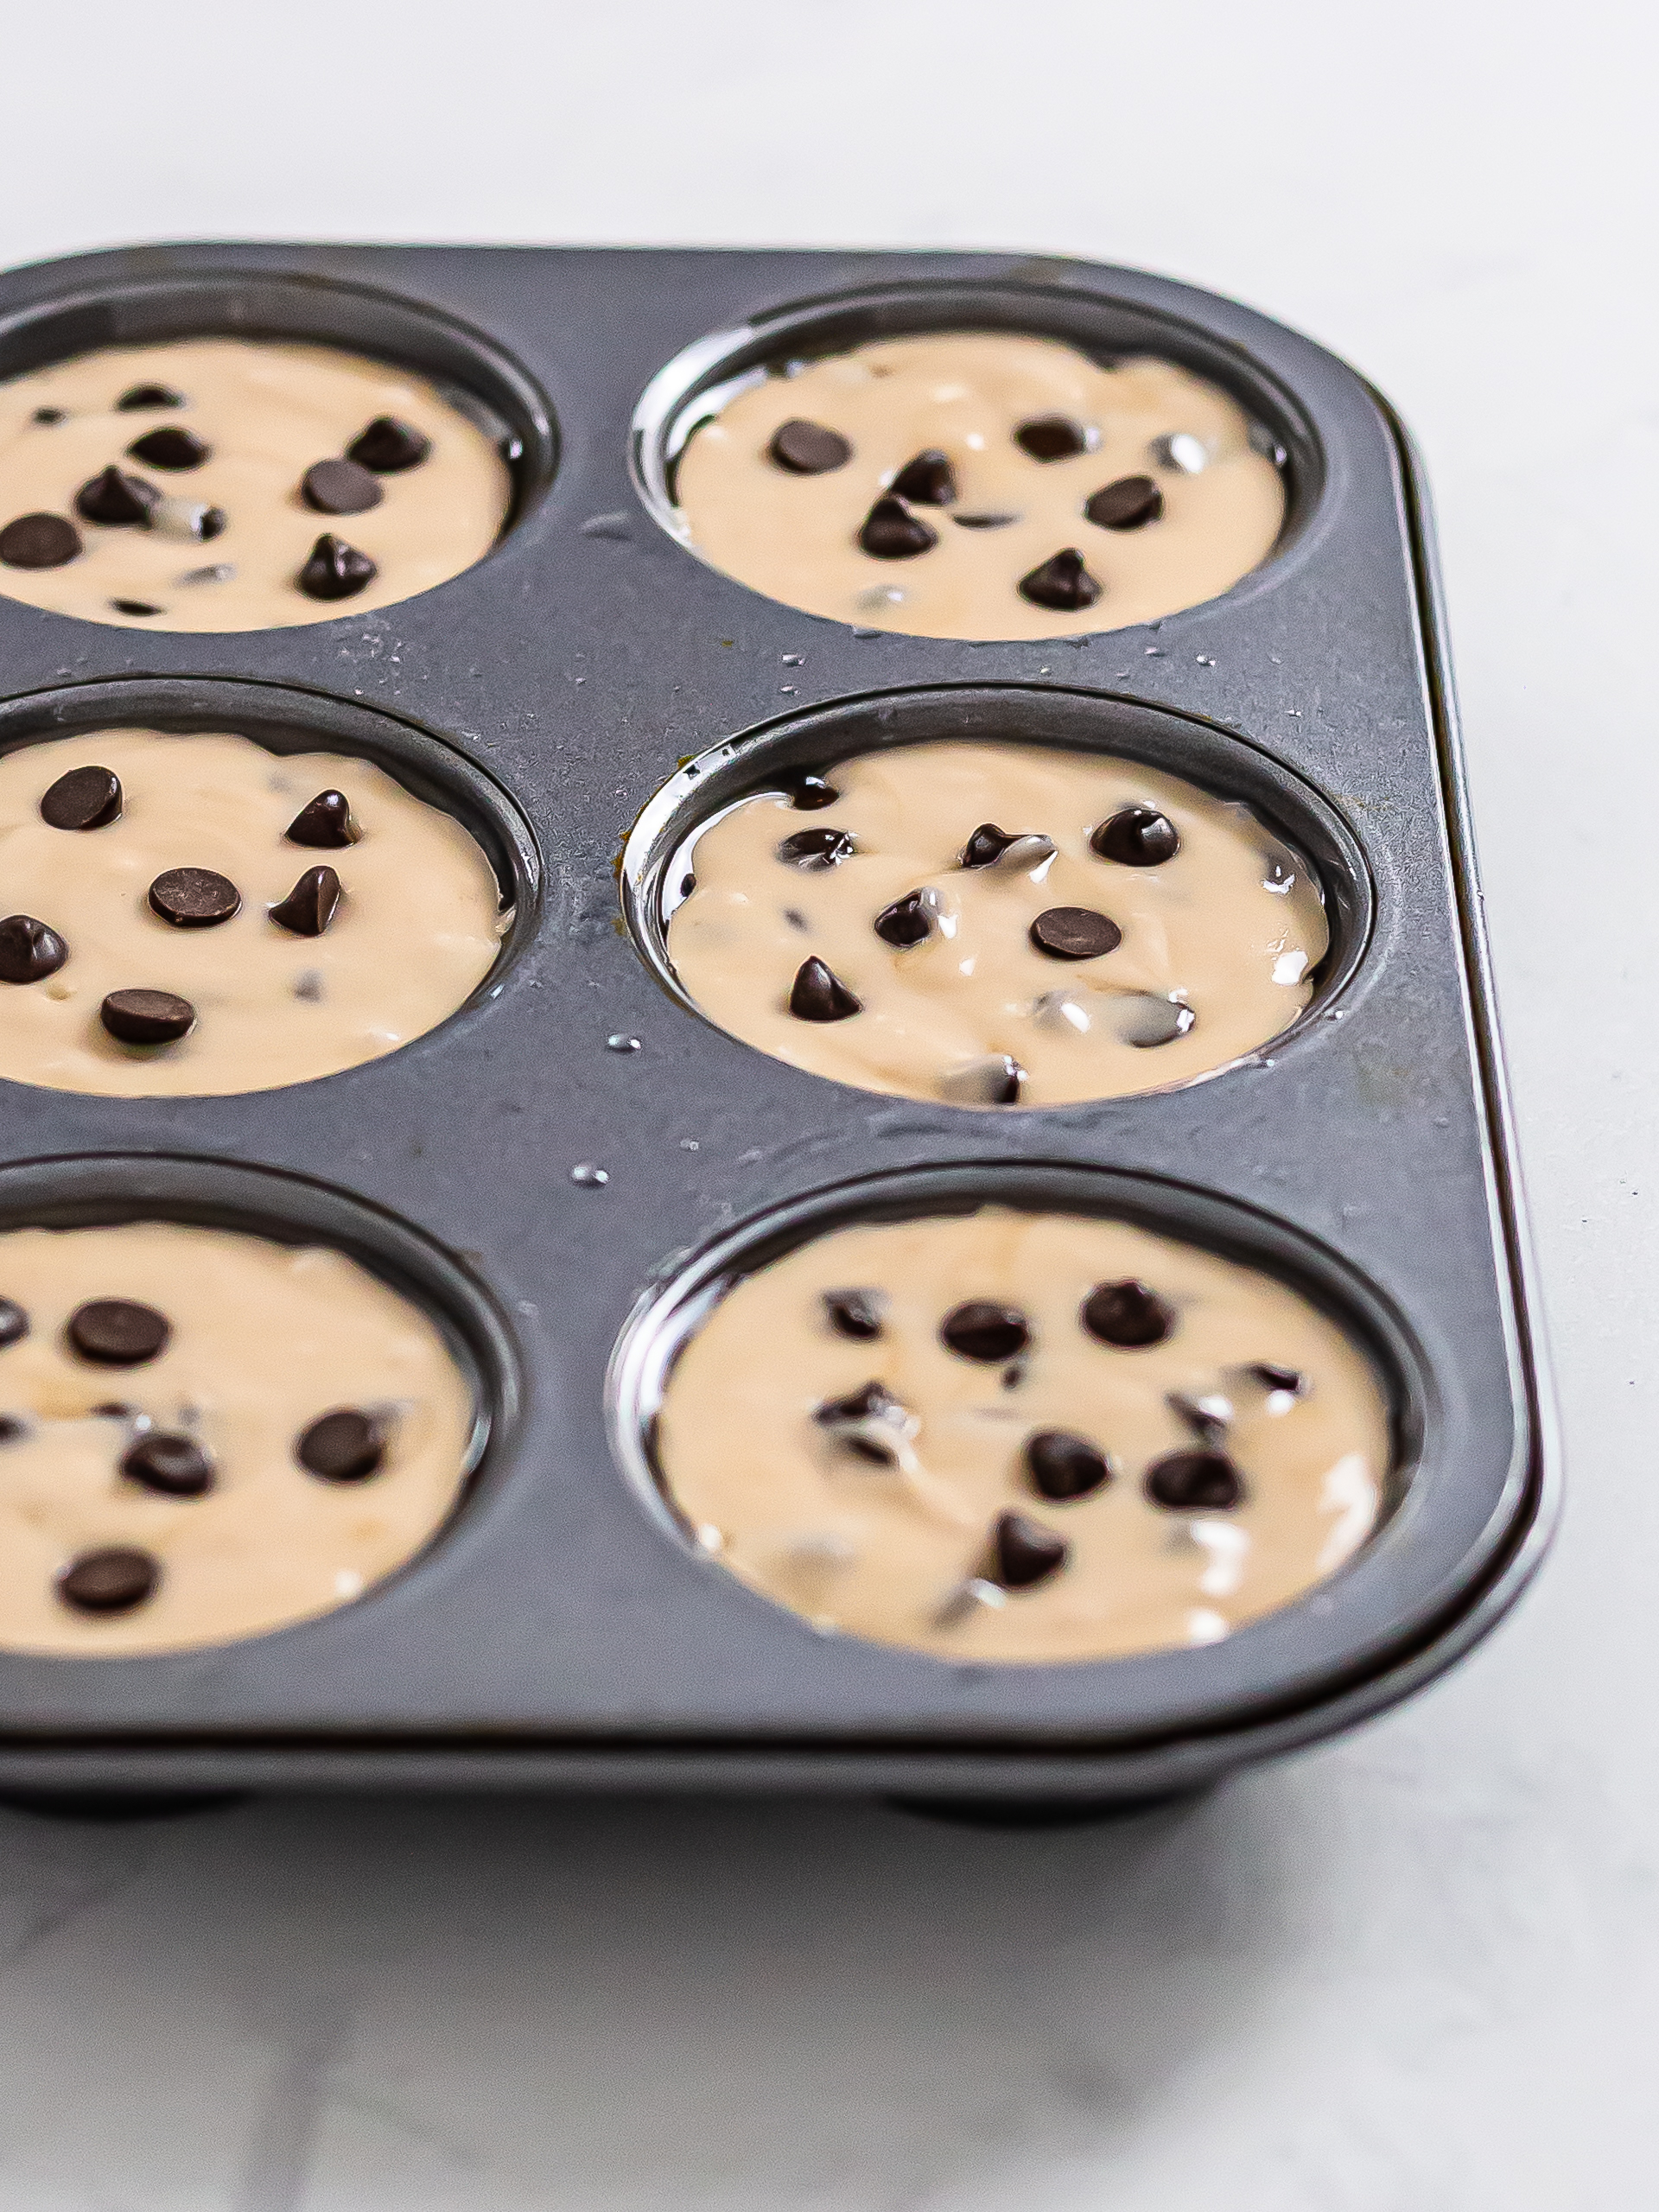 mochi muffins batter in a muffin tray